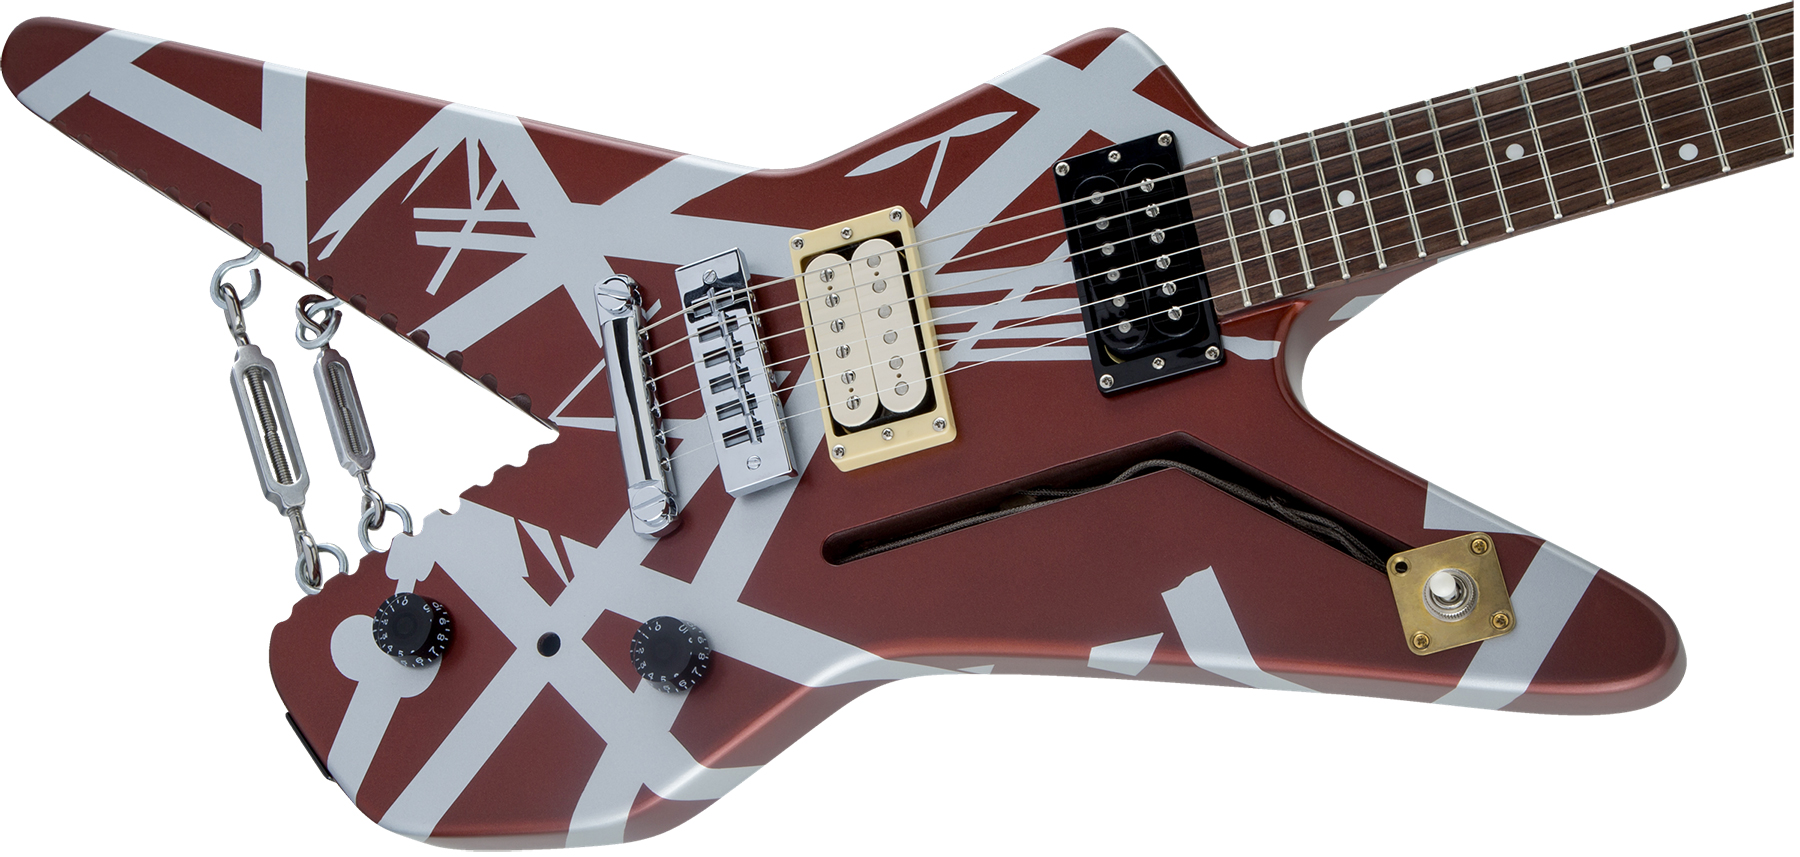 Evh Striped Series Shark Hh Ht Pf - Burgundy With Silver Stripes - Metal electric guitar - Variation 2